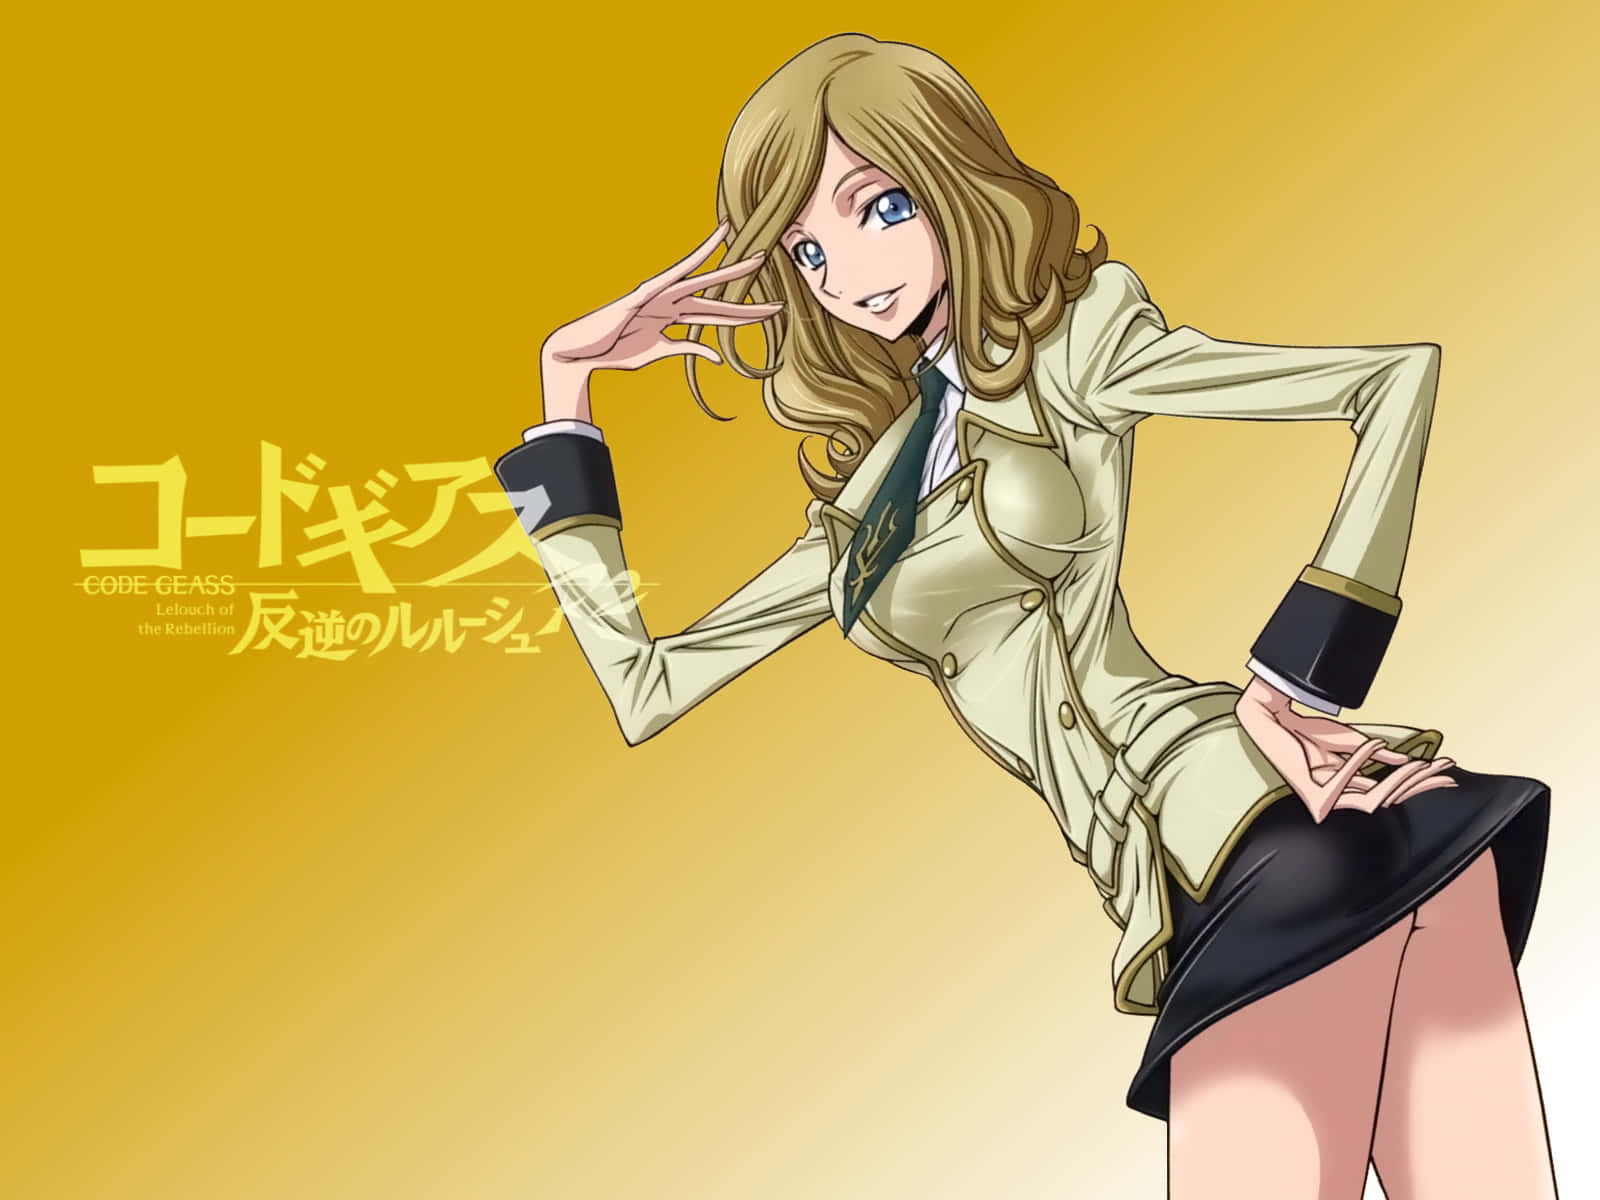 Milly Ashford - A charismatic student council president Wallpaper